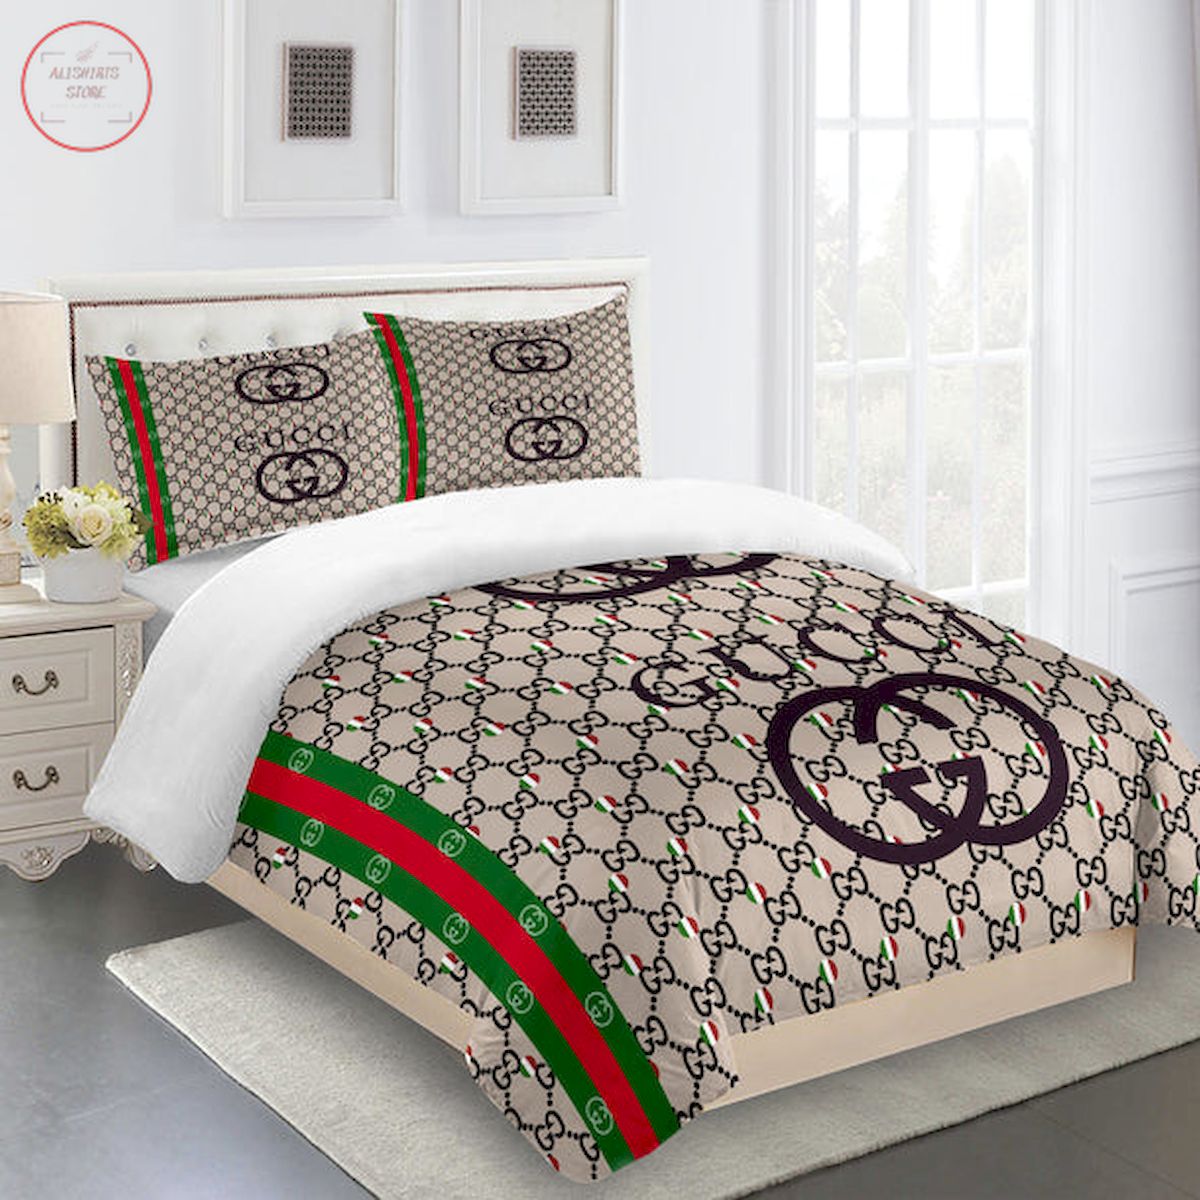 Gucci Italy bedding set Luxury bed sheets